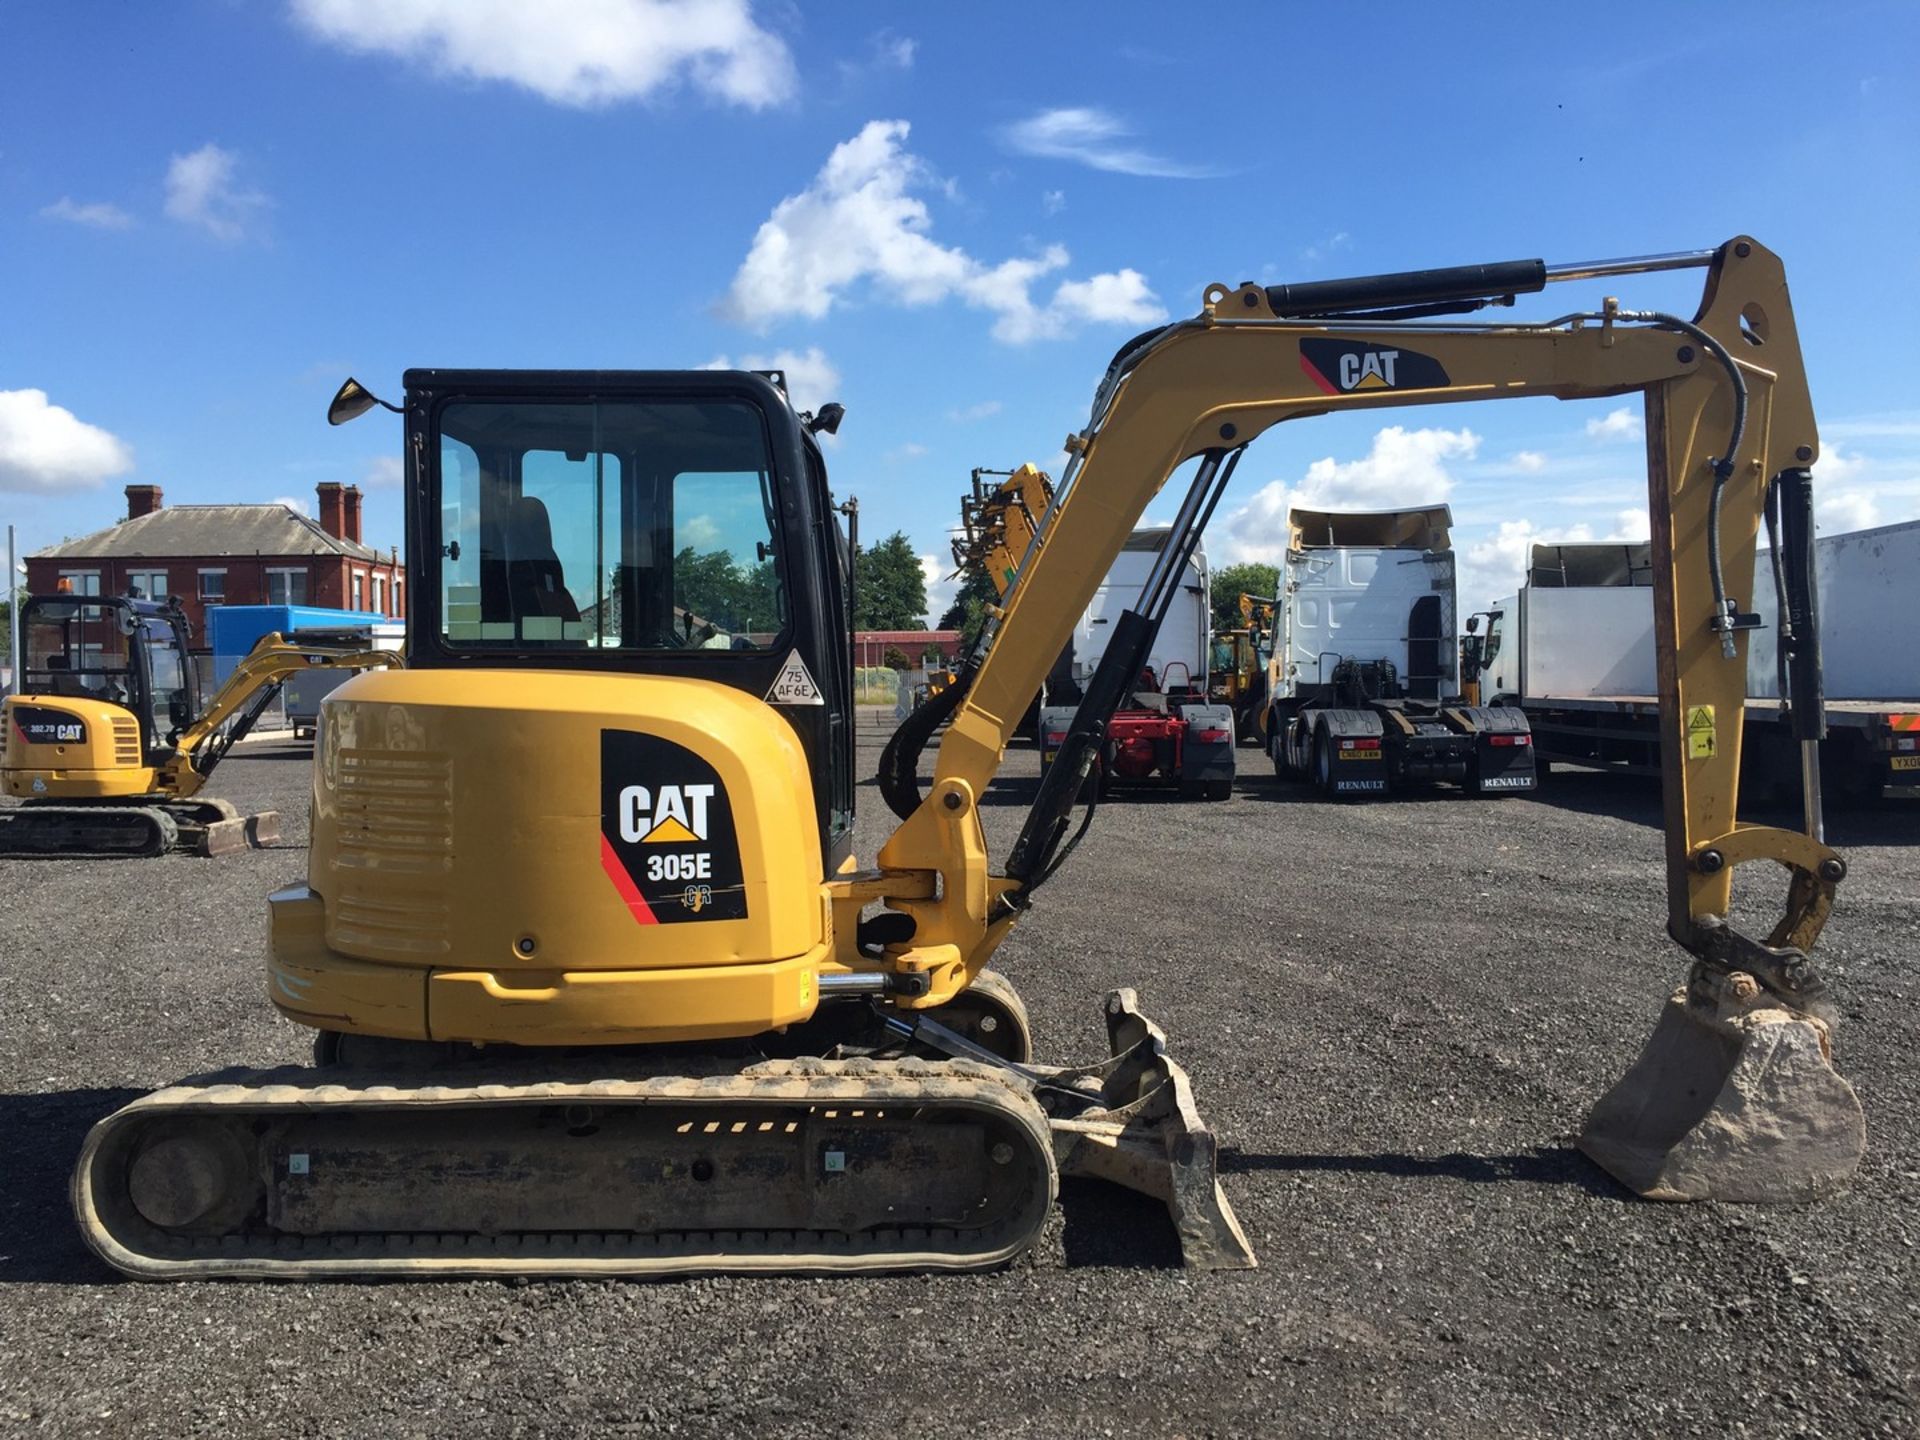 2012, Caterpillar 305 Excavator Serial No. DJX00871, Hrs 3424 approx, 1 x Bucket - Image 18 of 18